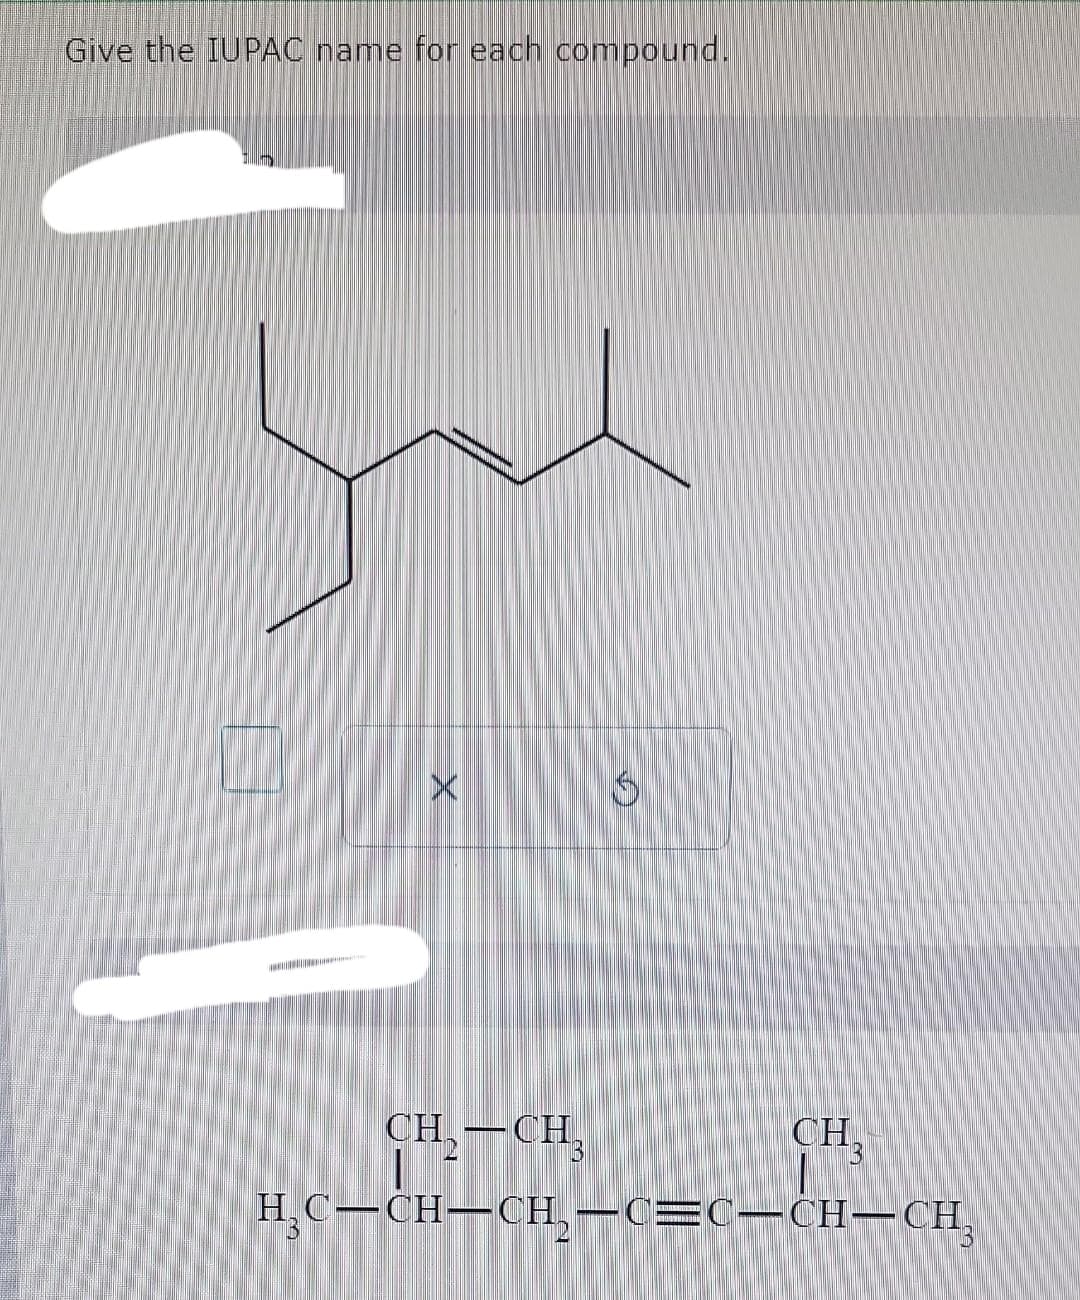 Give the IUPAC name for each compound.
you
Z *8
X
www
CH₂-CH₂
CH.
H₂C=CH-CH₂-C=C—CH-CH₂